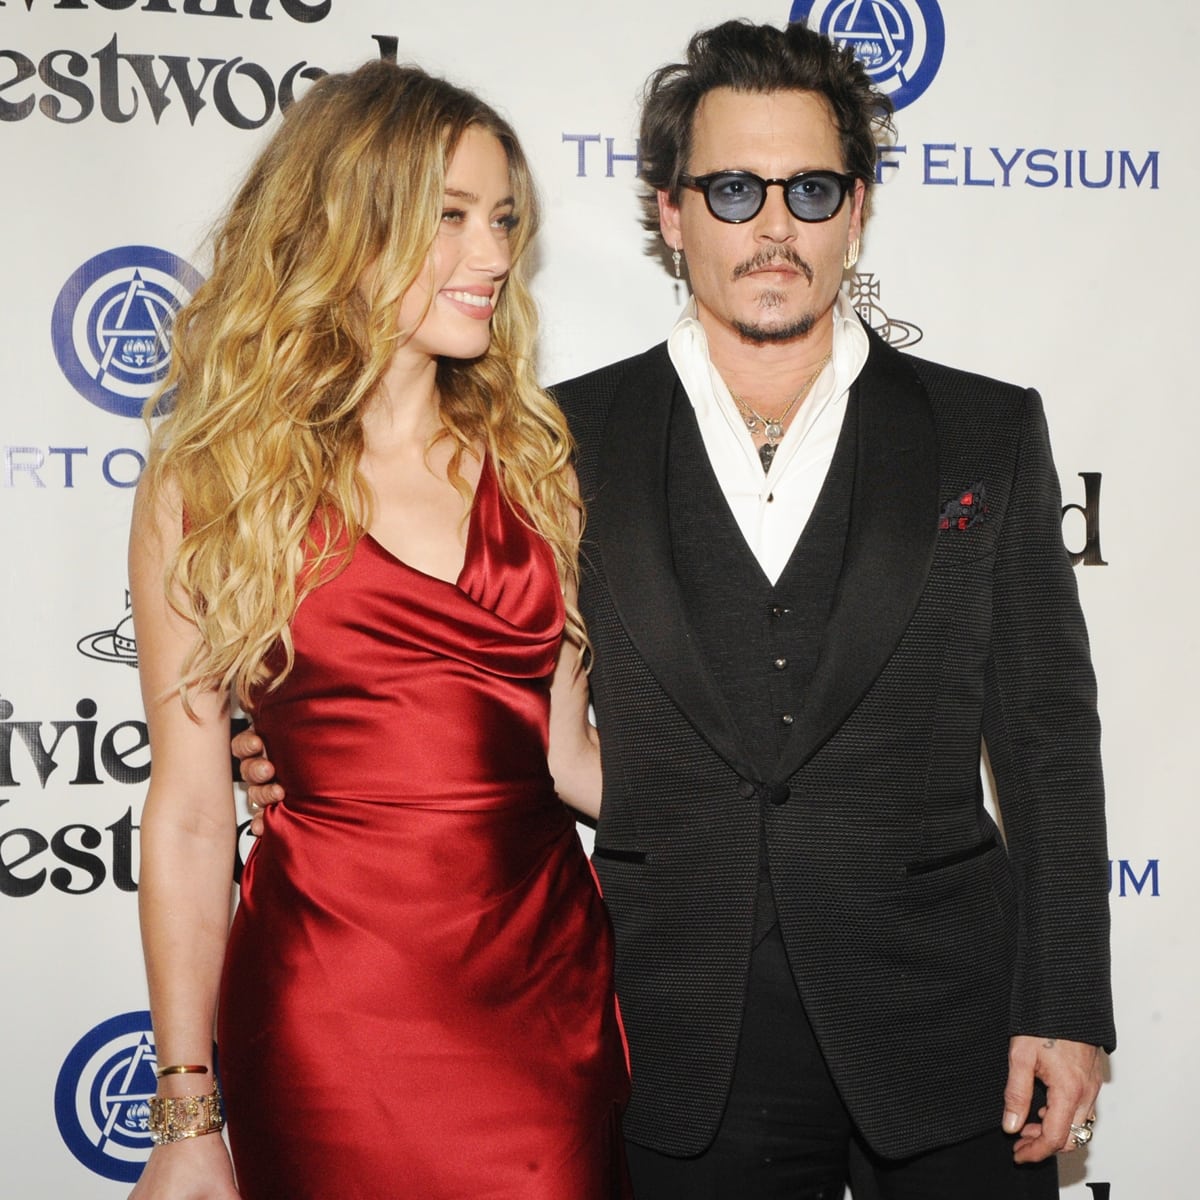 In December 2022, Amber Heard and Johnny Depp settled their defamation lawsuit out of court, with Amber agreeing to pay $1 million